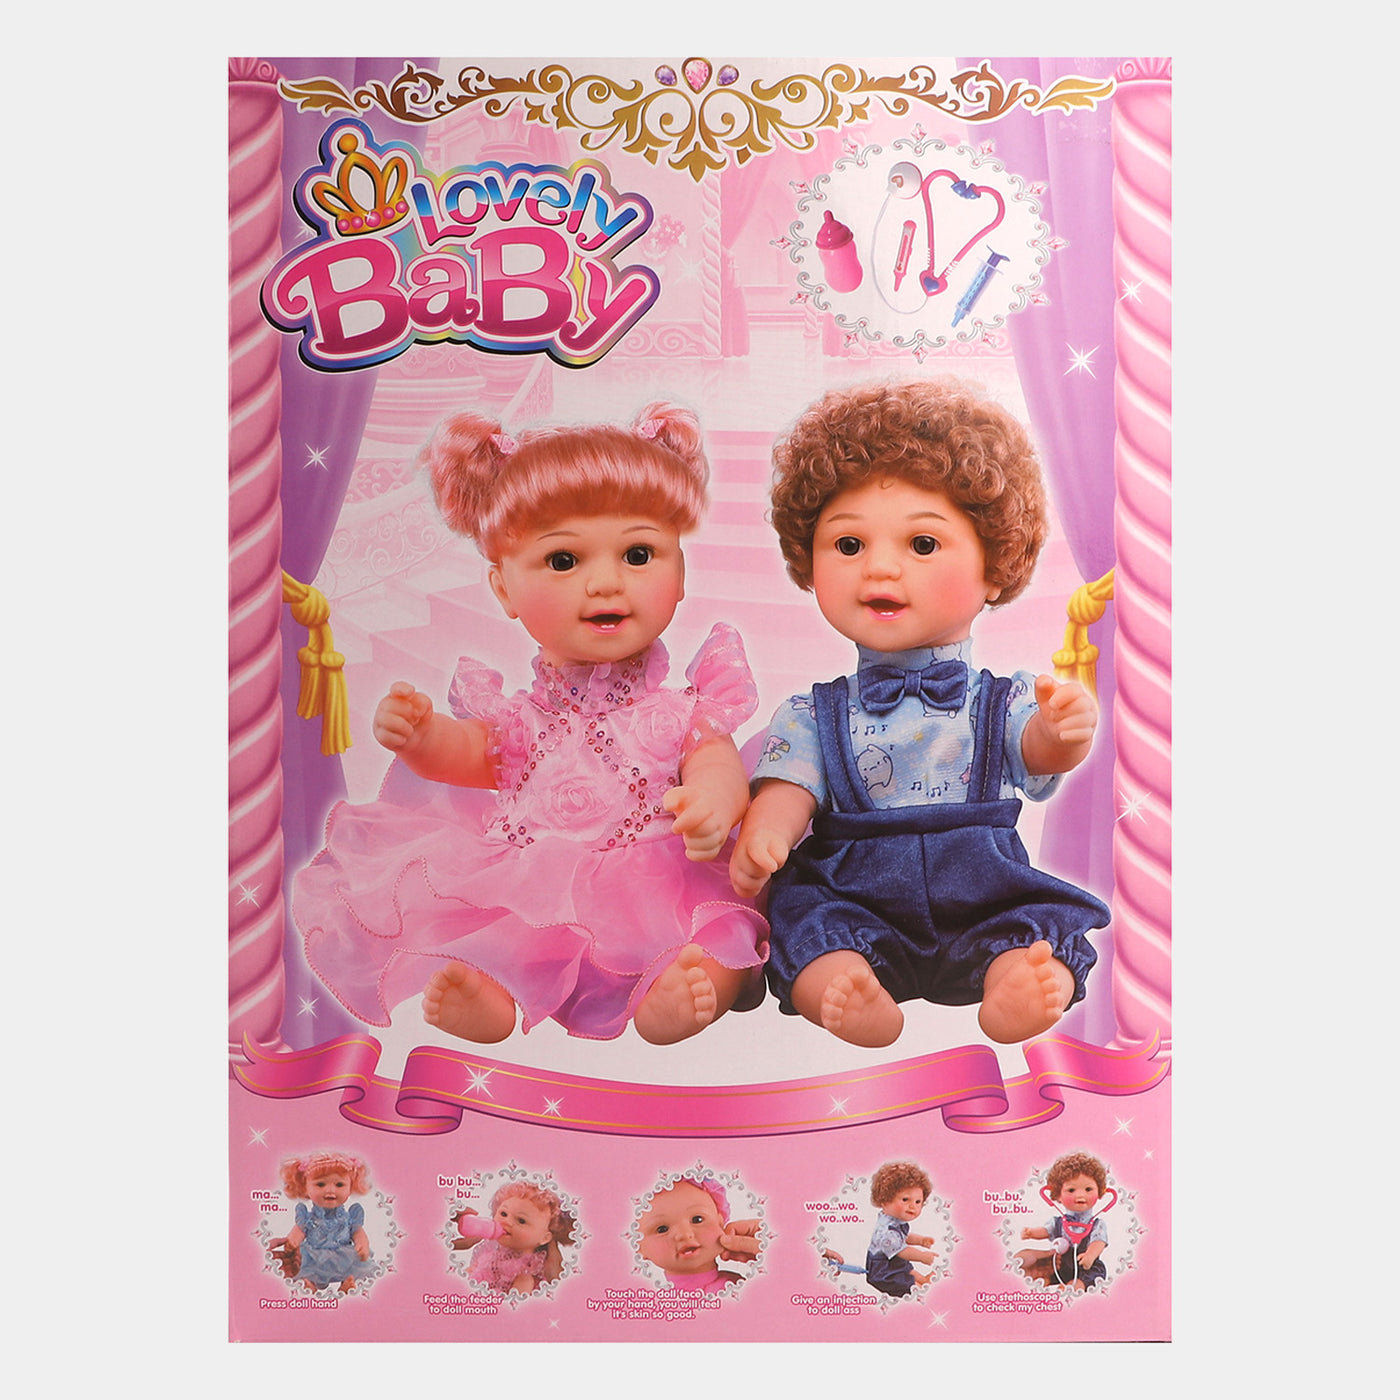 CUTE MOVING DOLL & DOCTOR SET TOY